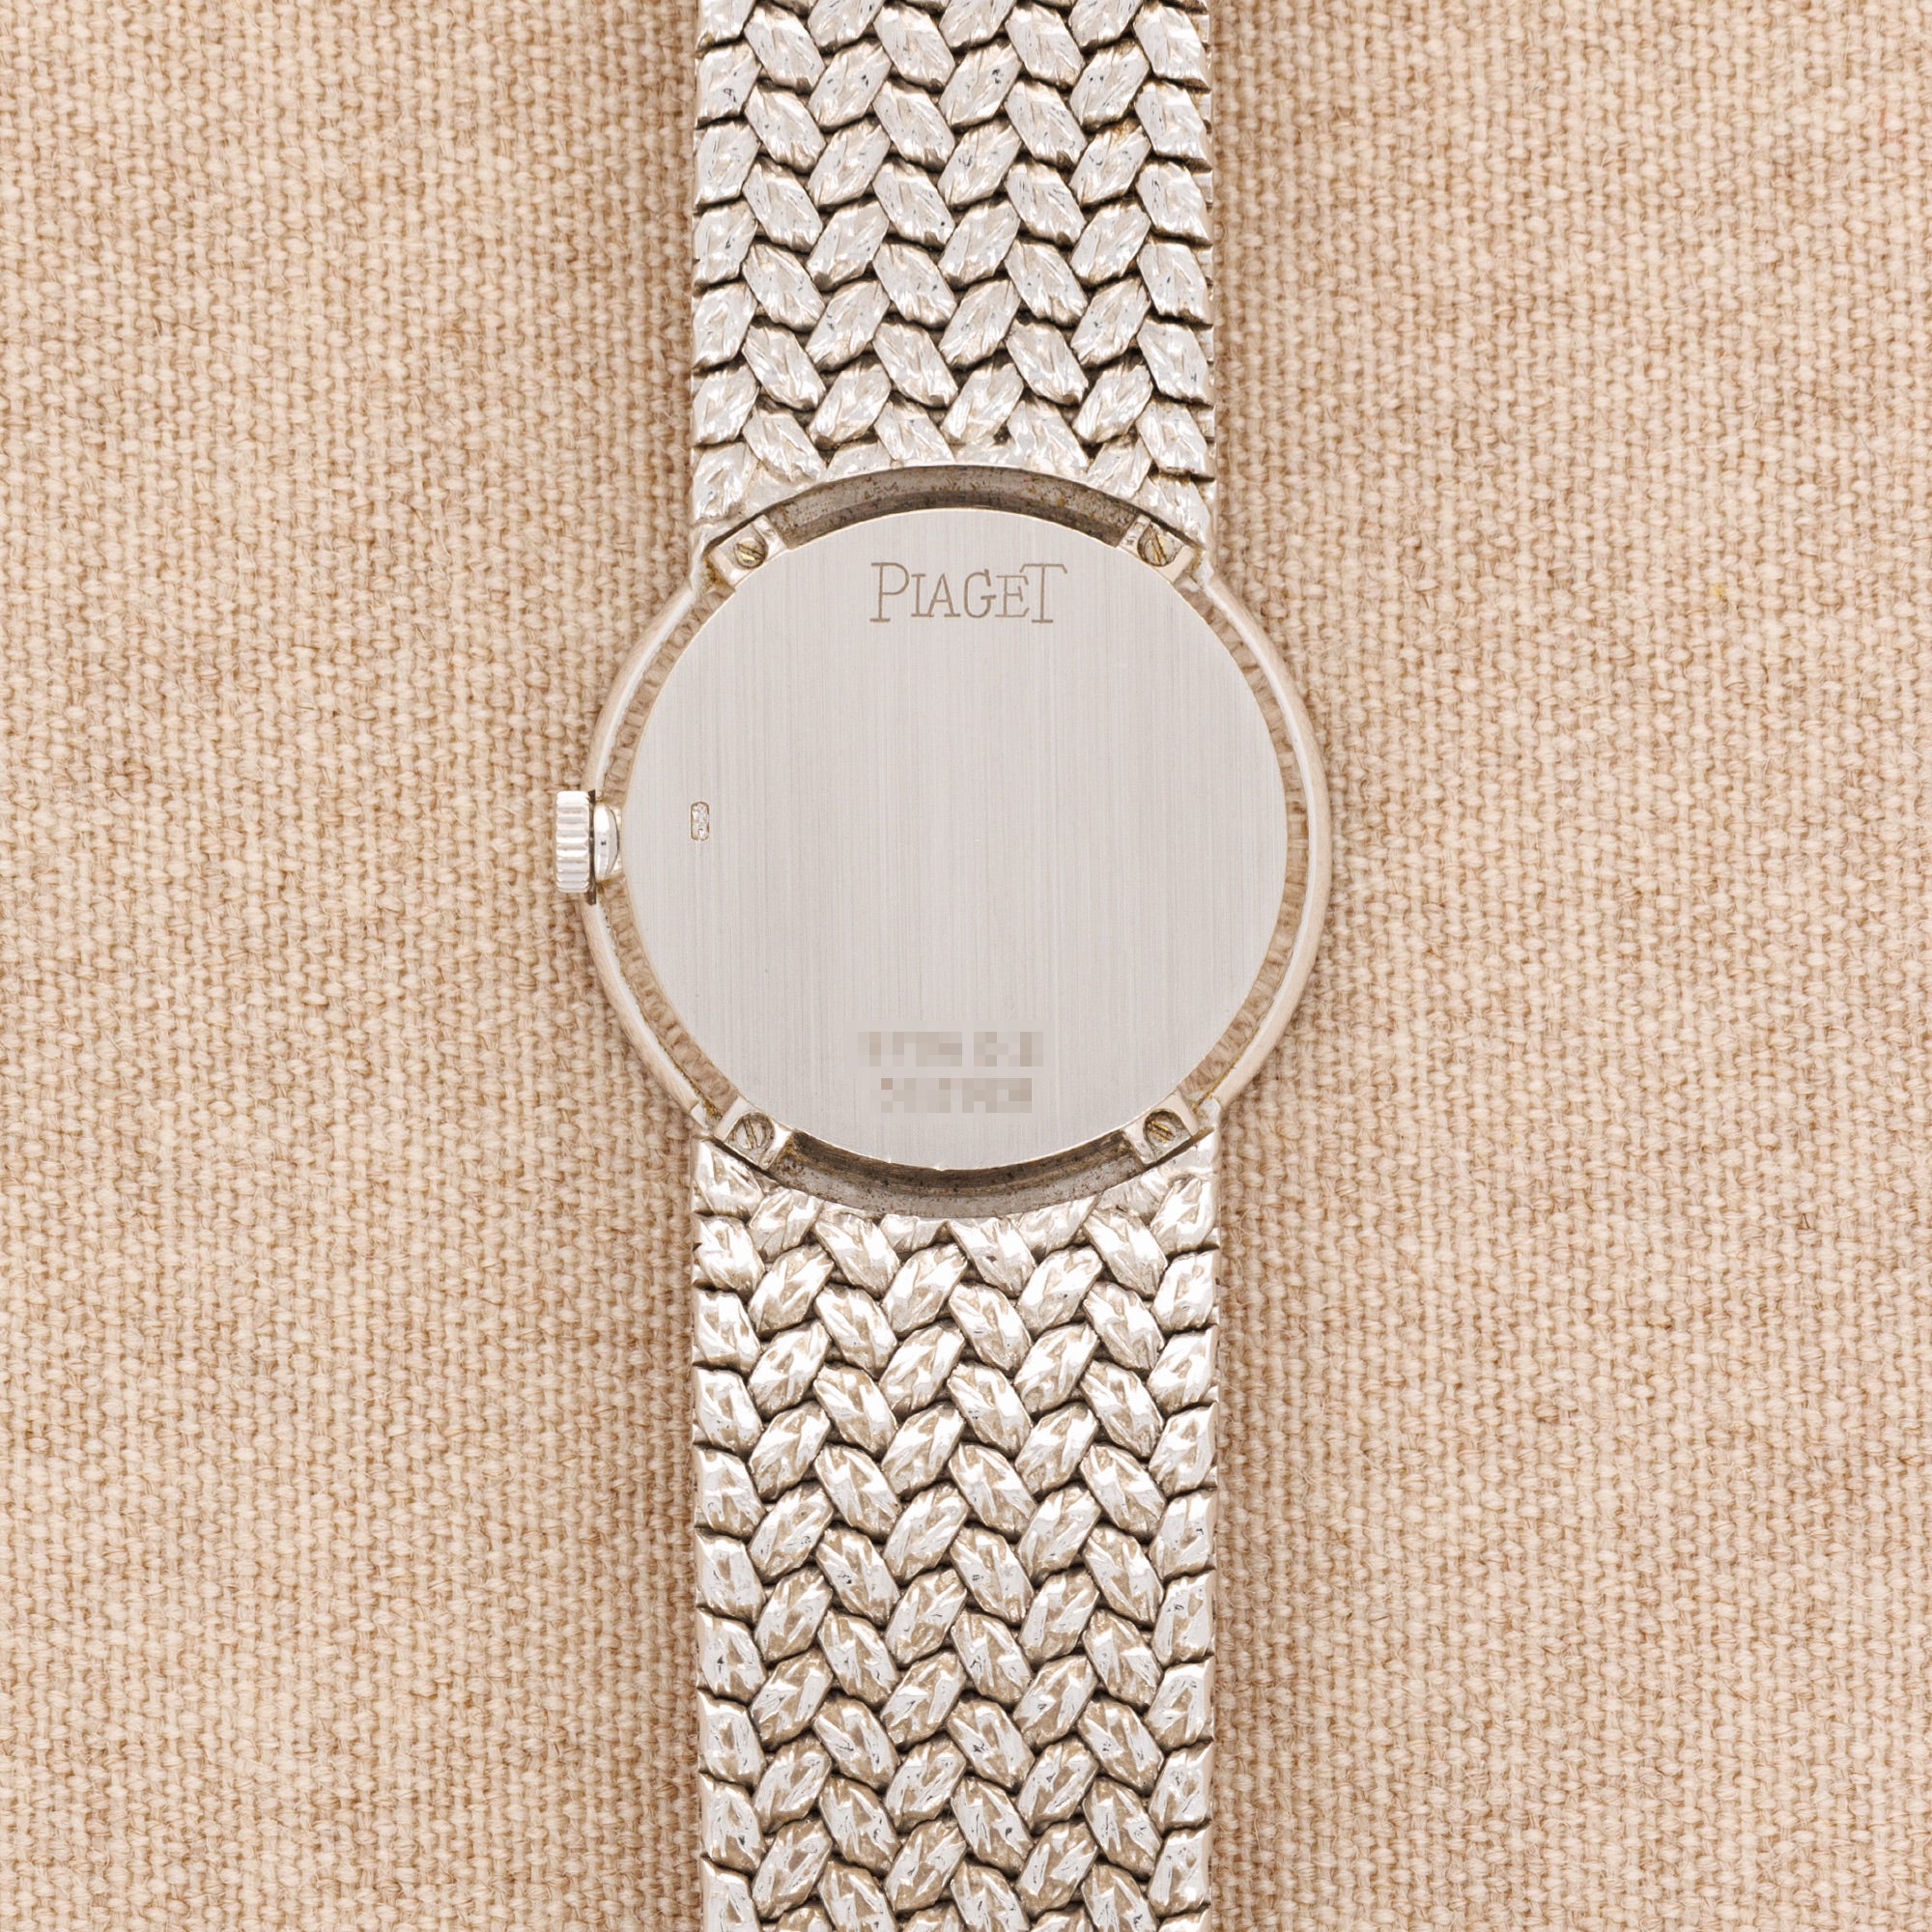 Piaget - Piaget White Gold, Opal and Diamond Watch Ref. 9706 - The Keystone Watches